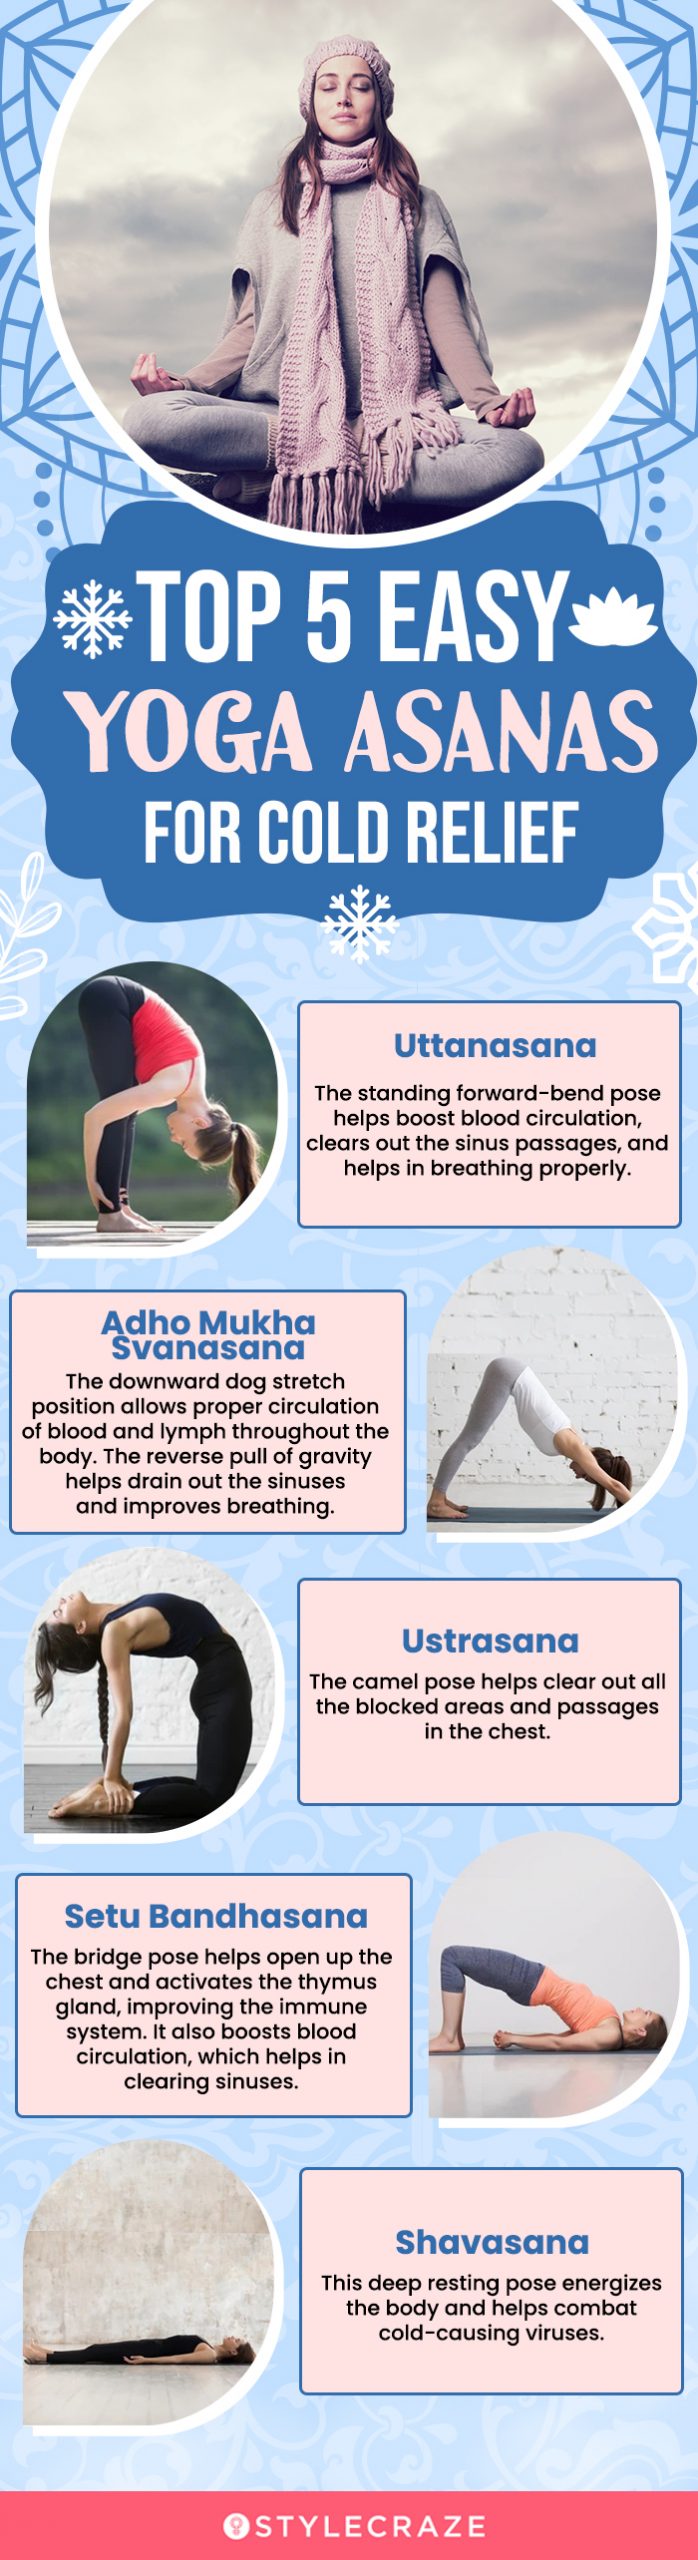 top 5 easy yoga asanas for cold relief (infographic)